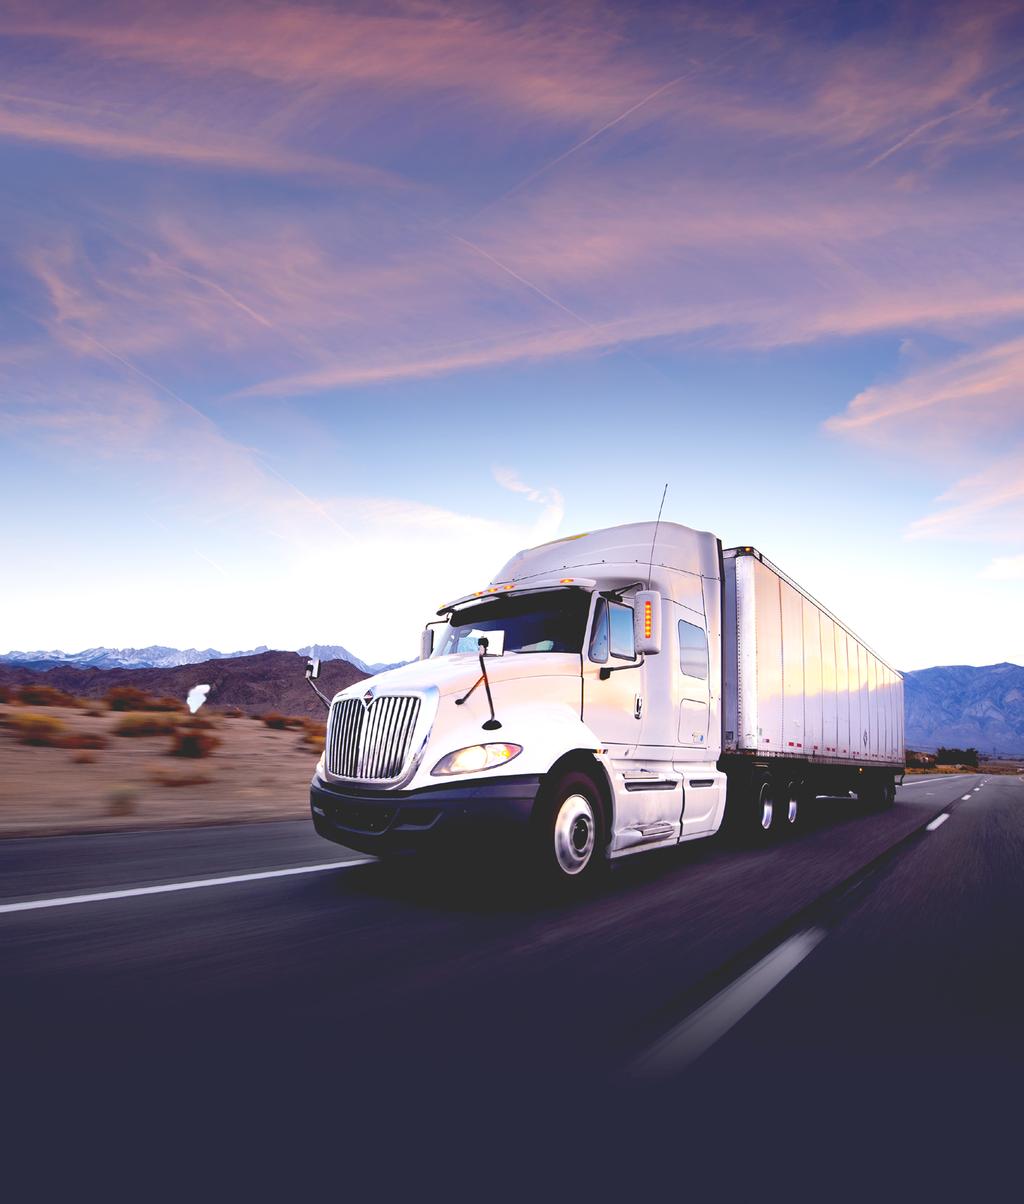 2018 Fleet Management Strategies of Top Performers Descartes Fleet Management Benchmark Study Findings The role and value of the fleet is continually evolving as more companies are recognizing its